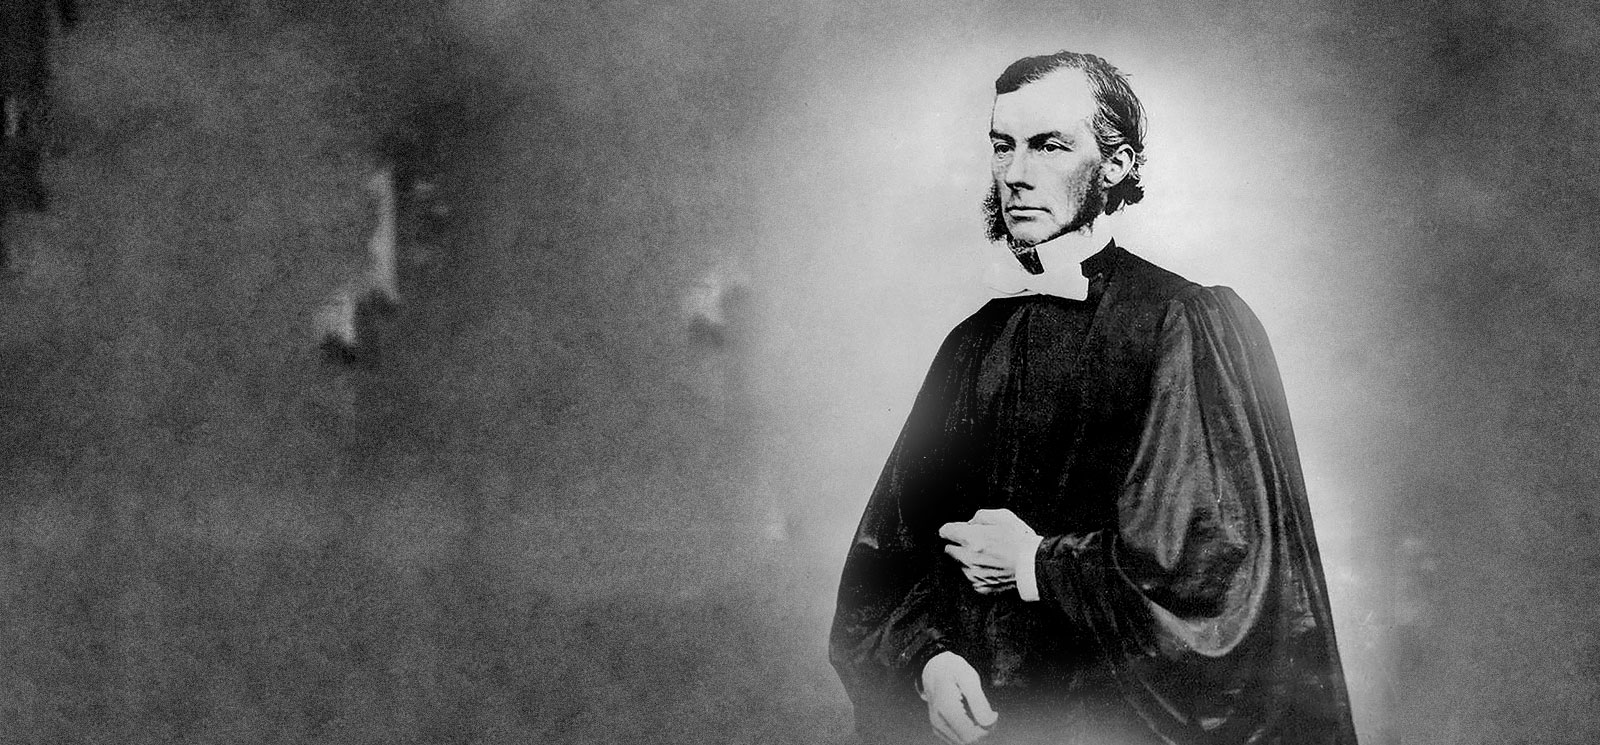 Photograph of Reverend Edward Griffith, ca. 1850. Source: John Oxley Library, State Library of Queensland, Negative No. 34459.